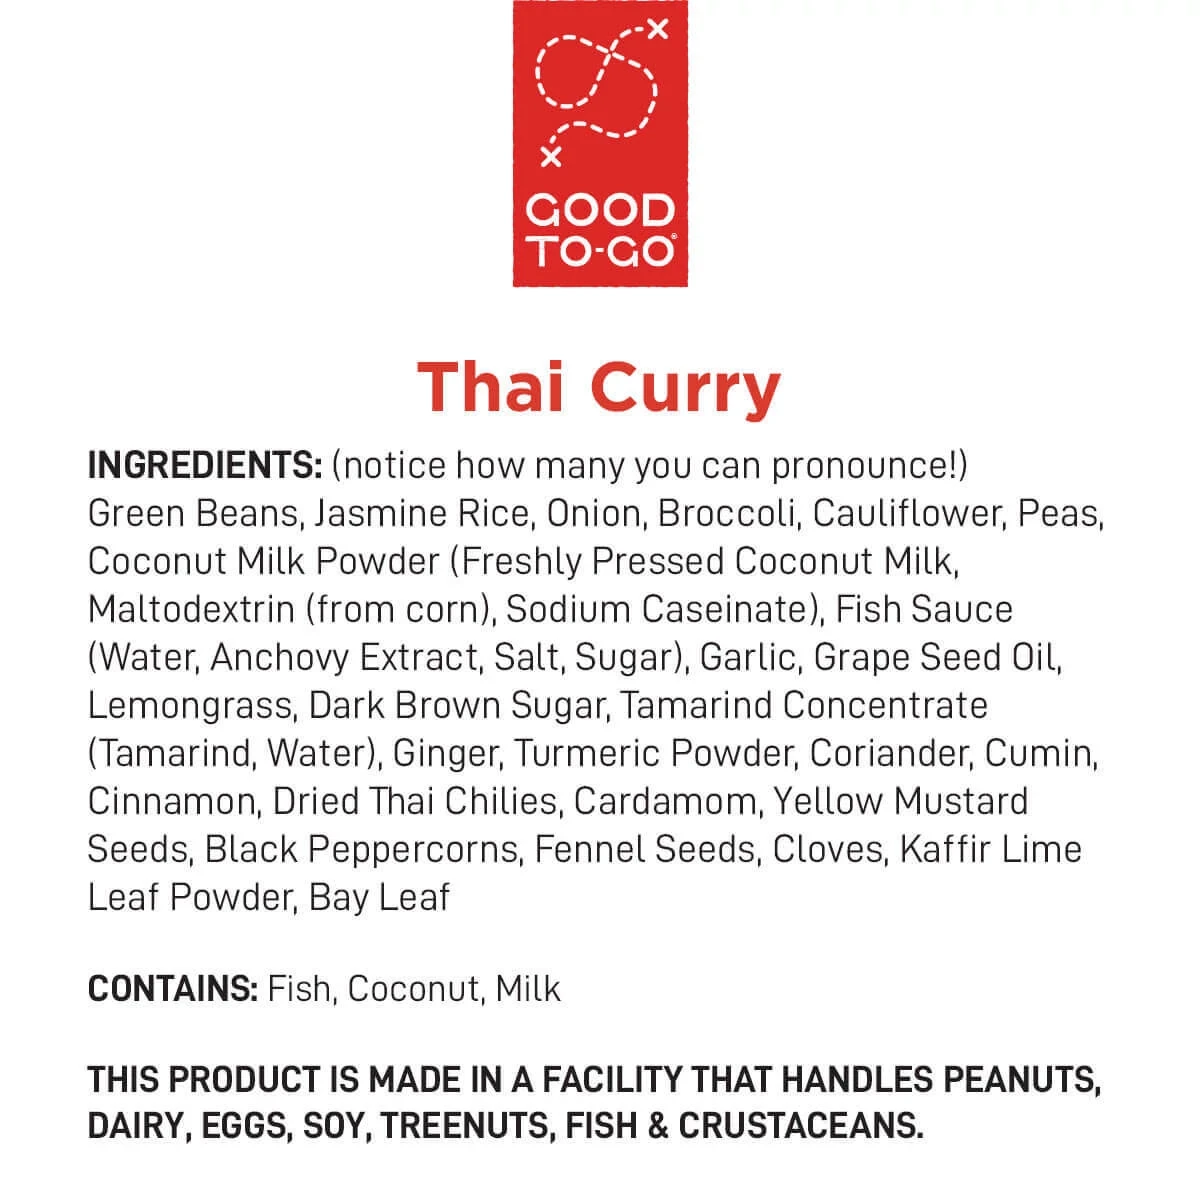 Good To-Go Thai Curry Ingredients